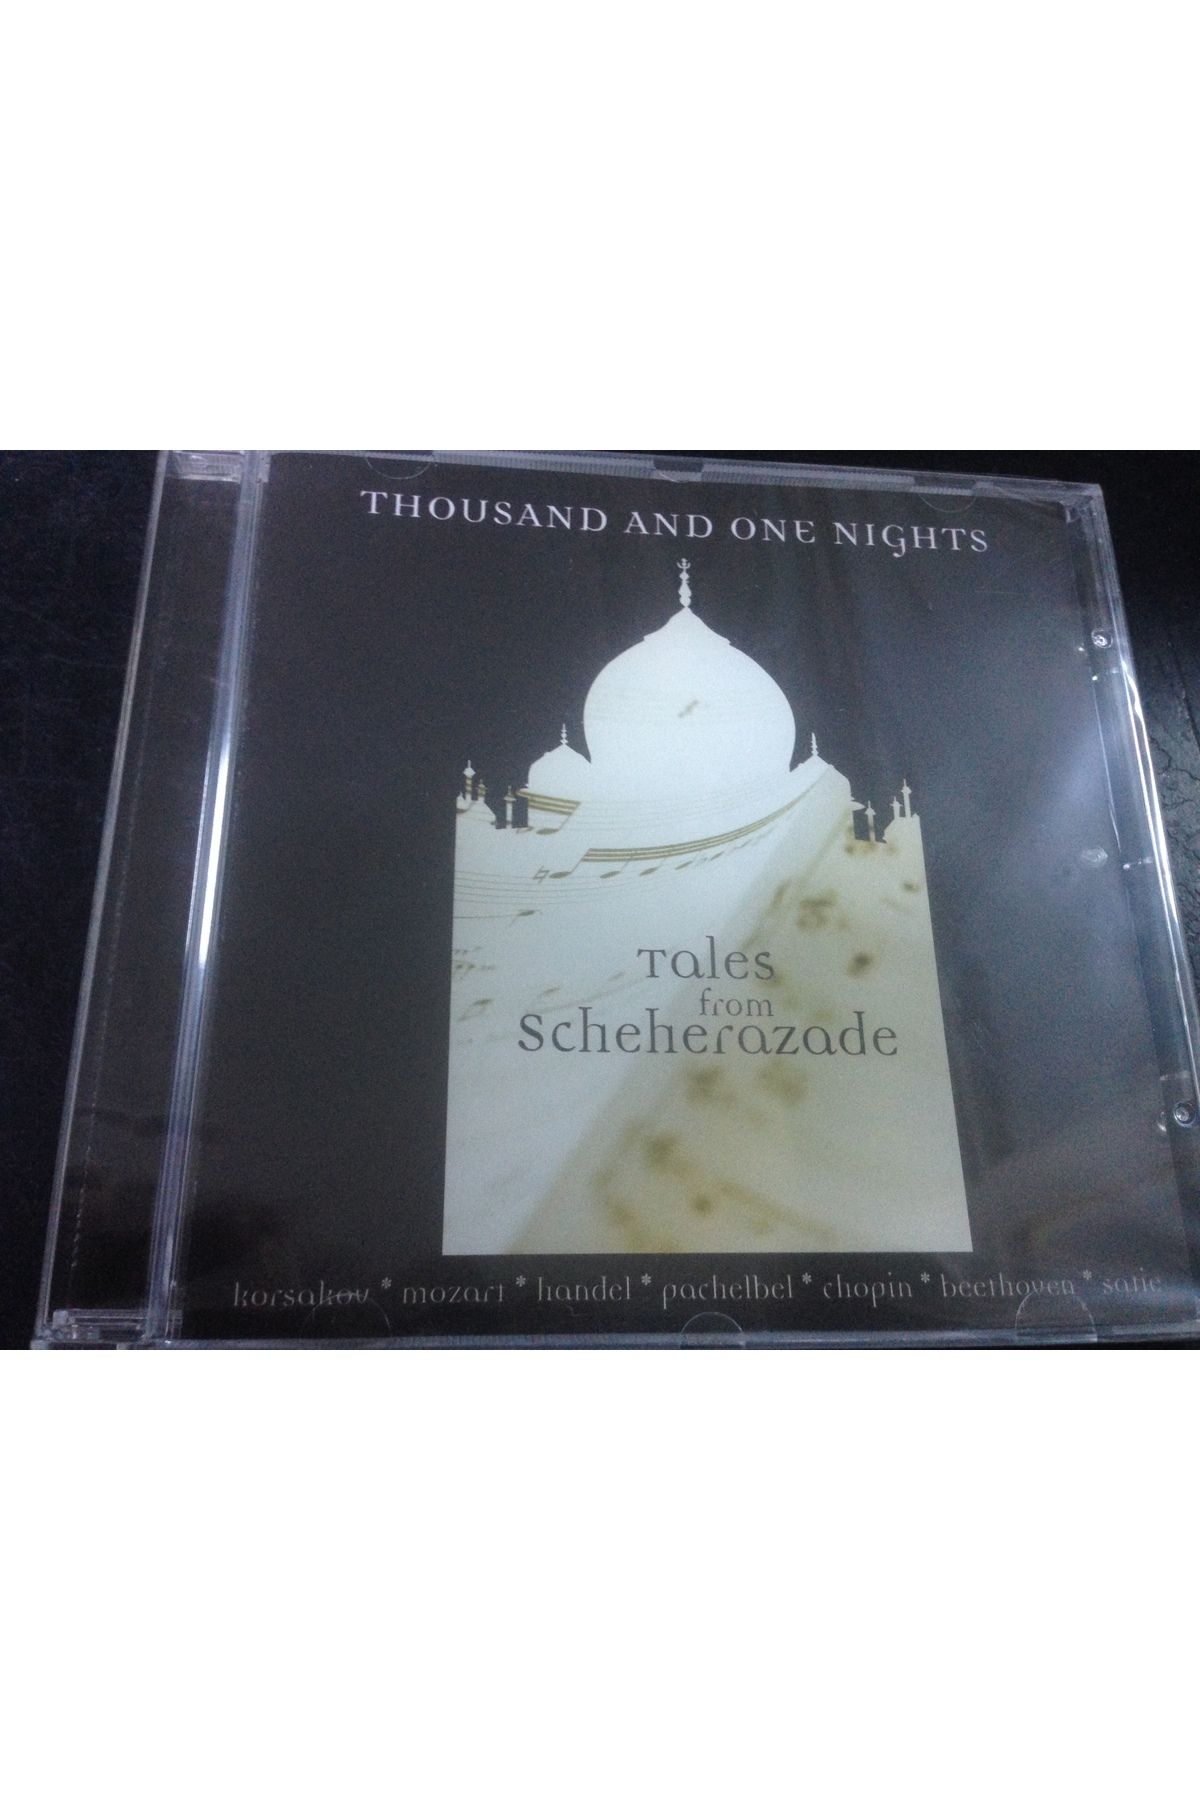 Sony THOUSAND AND ONE NİGHTS TALES FROM SCHEHERAZADE MOZART HANDEL CHOPİN BEETHOVEN CD SIFIR